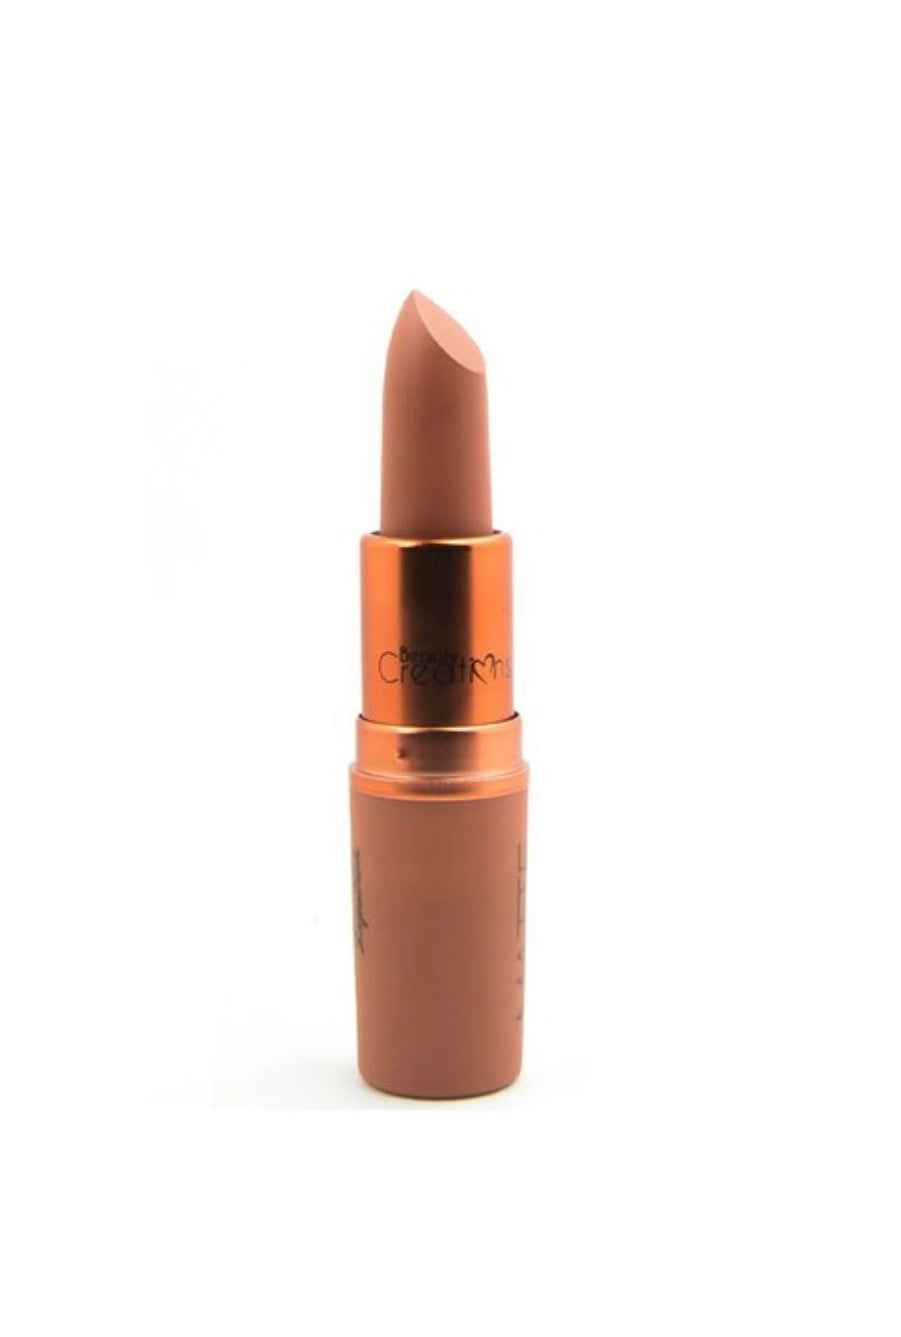 Beauty Creations Matte Lipstick, Totally Nude